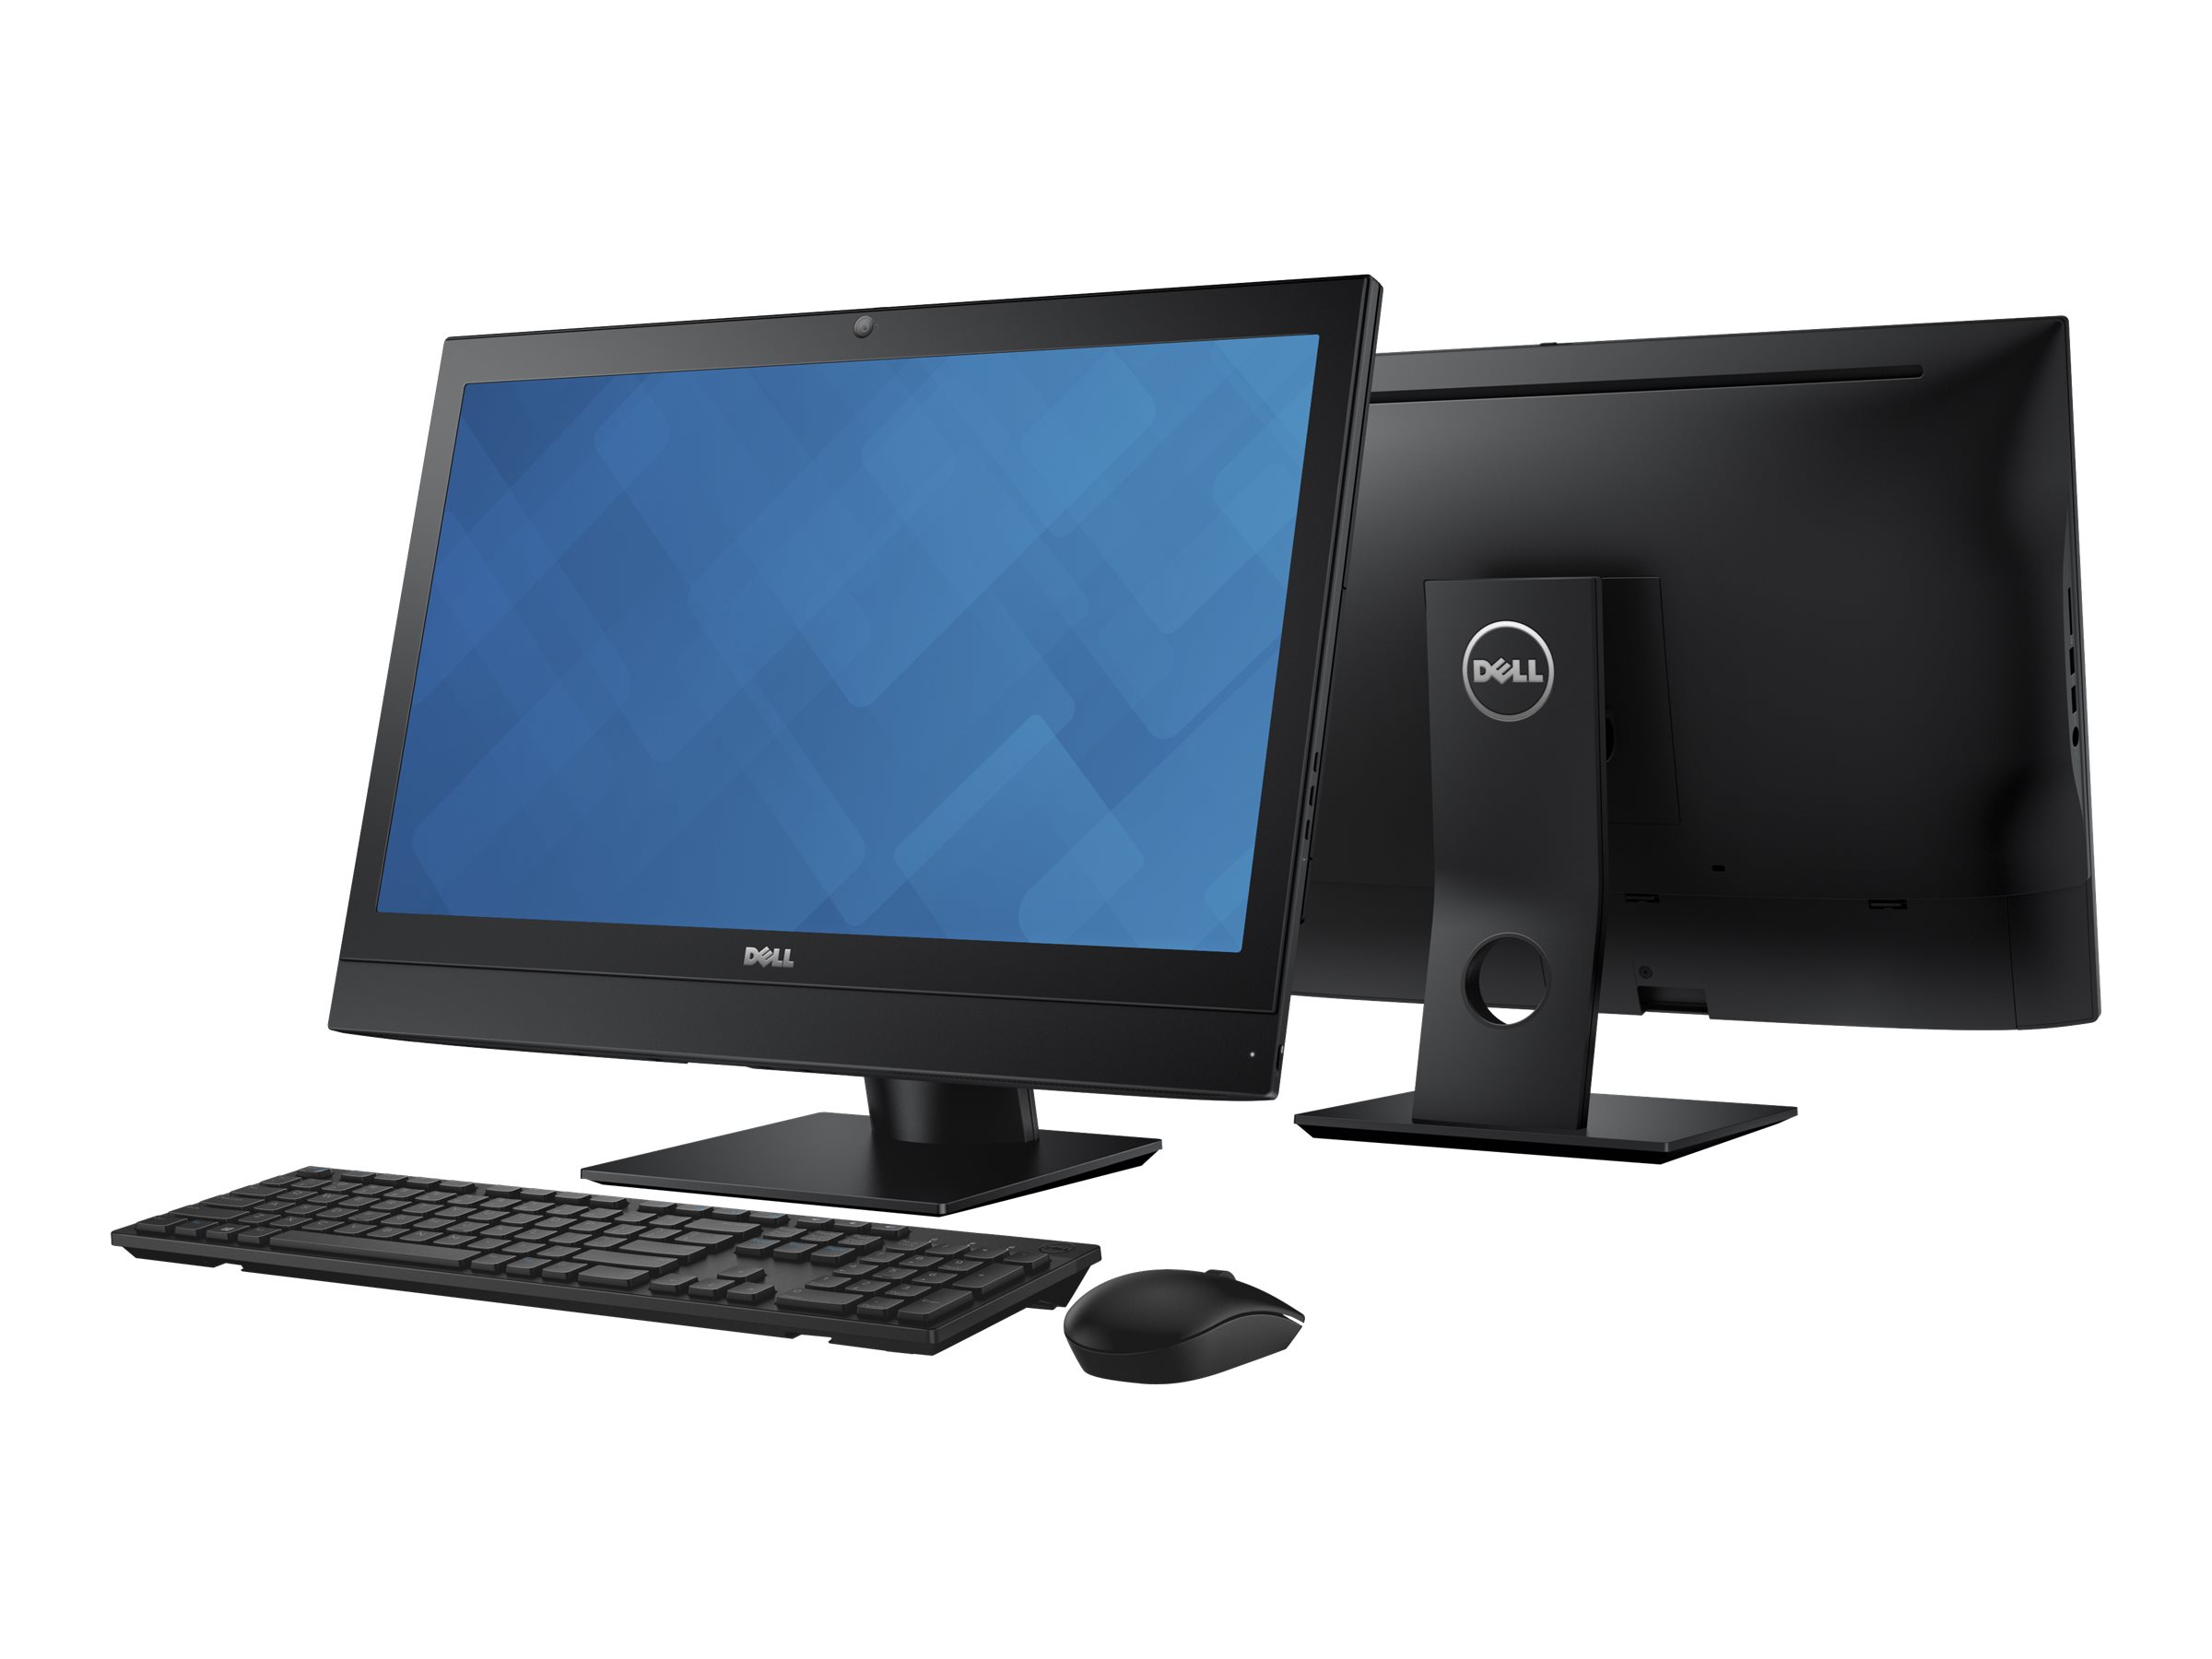 Dell OptiPlex 7440 - All-in-one - Core i5 6500 / 3.2 GHz - vPro - RAM 8 GB - HDD 500 GB - DVD-Writer - HD Graphics 530 - GigE - WLAN: 802.11a/b/g/n/ac, Bluetooth 4.1 - Win 7 Pro 64-bit (includes Win 10 Pro 64-bit License) - monitor: LED 23" 1920 x 1080 (Full HD) - keyboard: English - with 3 Years Hardware Service with Onsite/In-Home Service After Remote Diagnosis - image 4 of 8